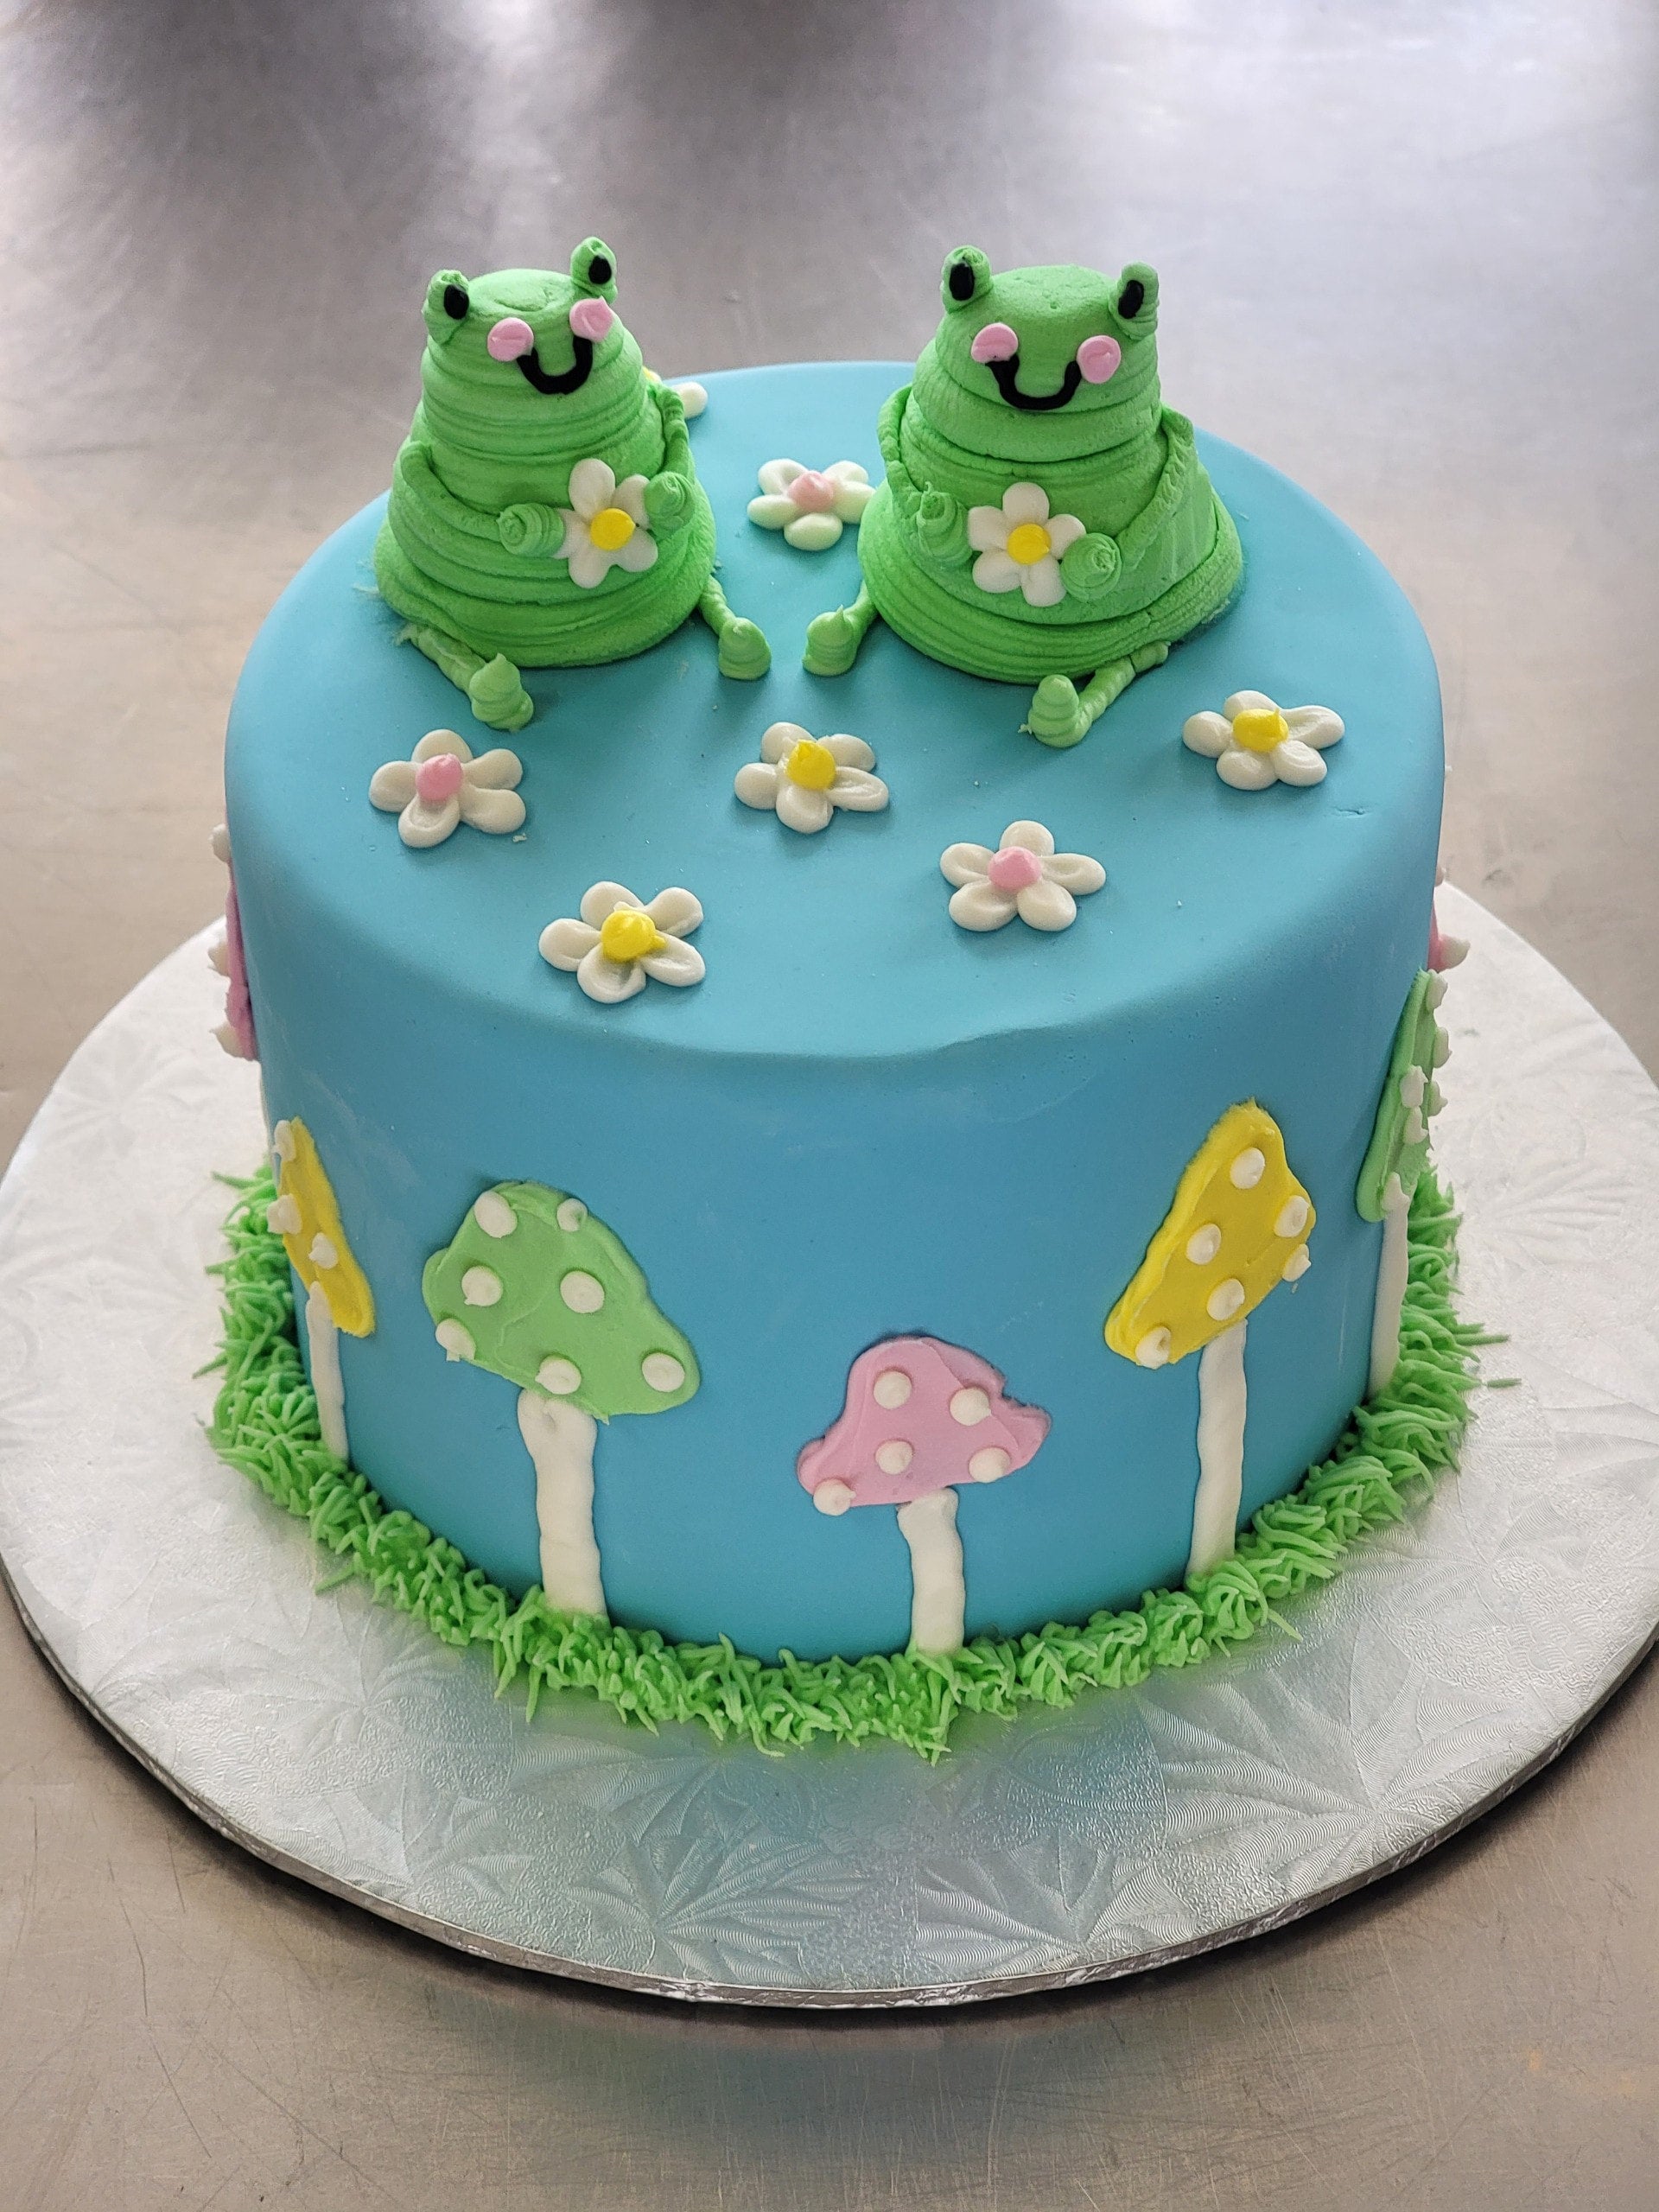 Soft Deer Squishies Frog Cake, Chicken, Dolphin, Corn Squishies